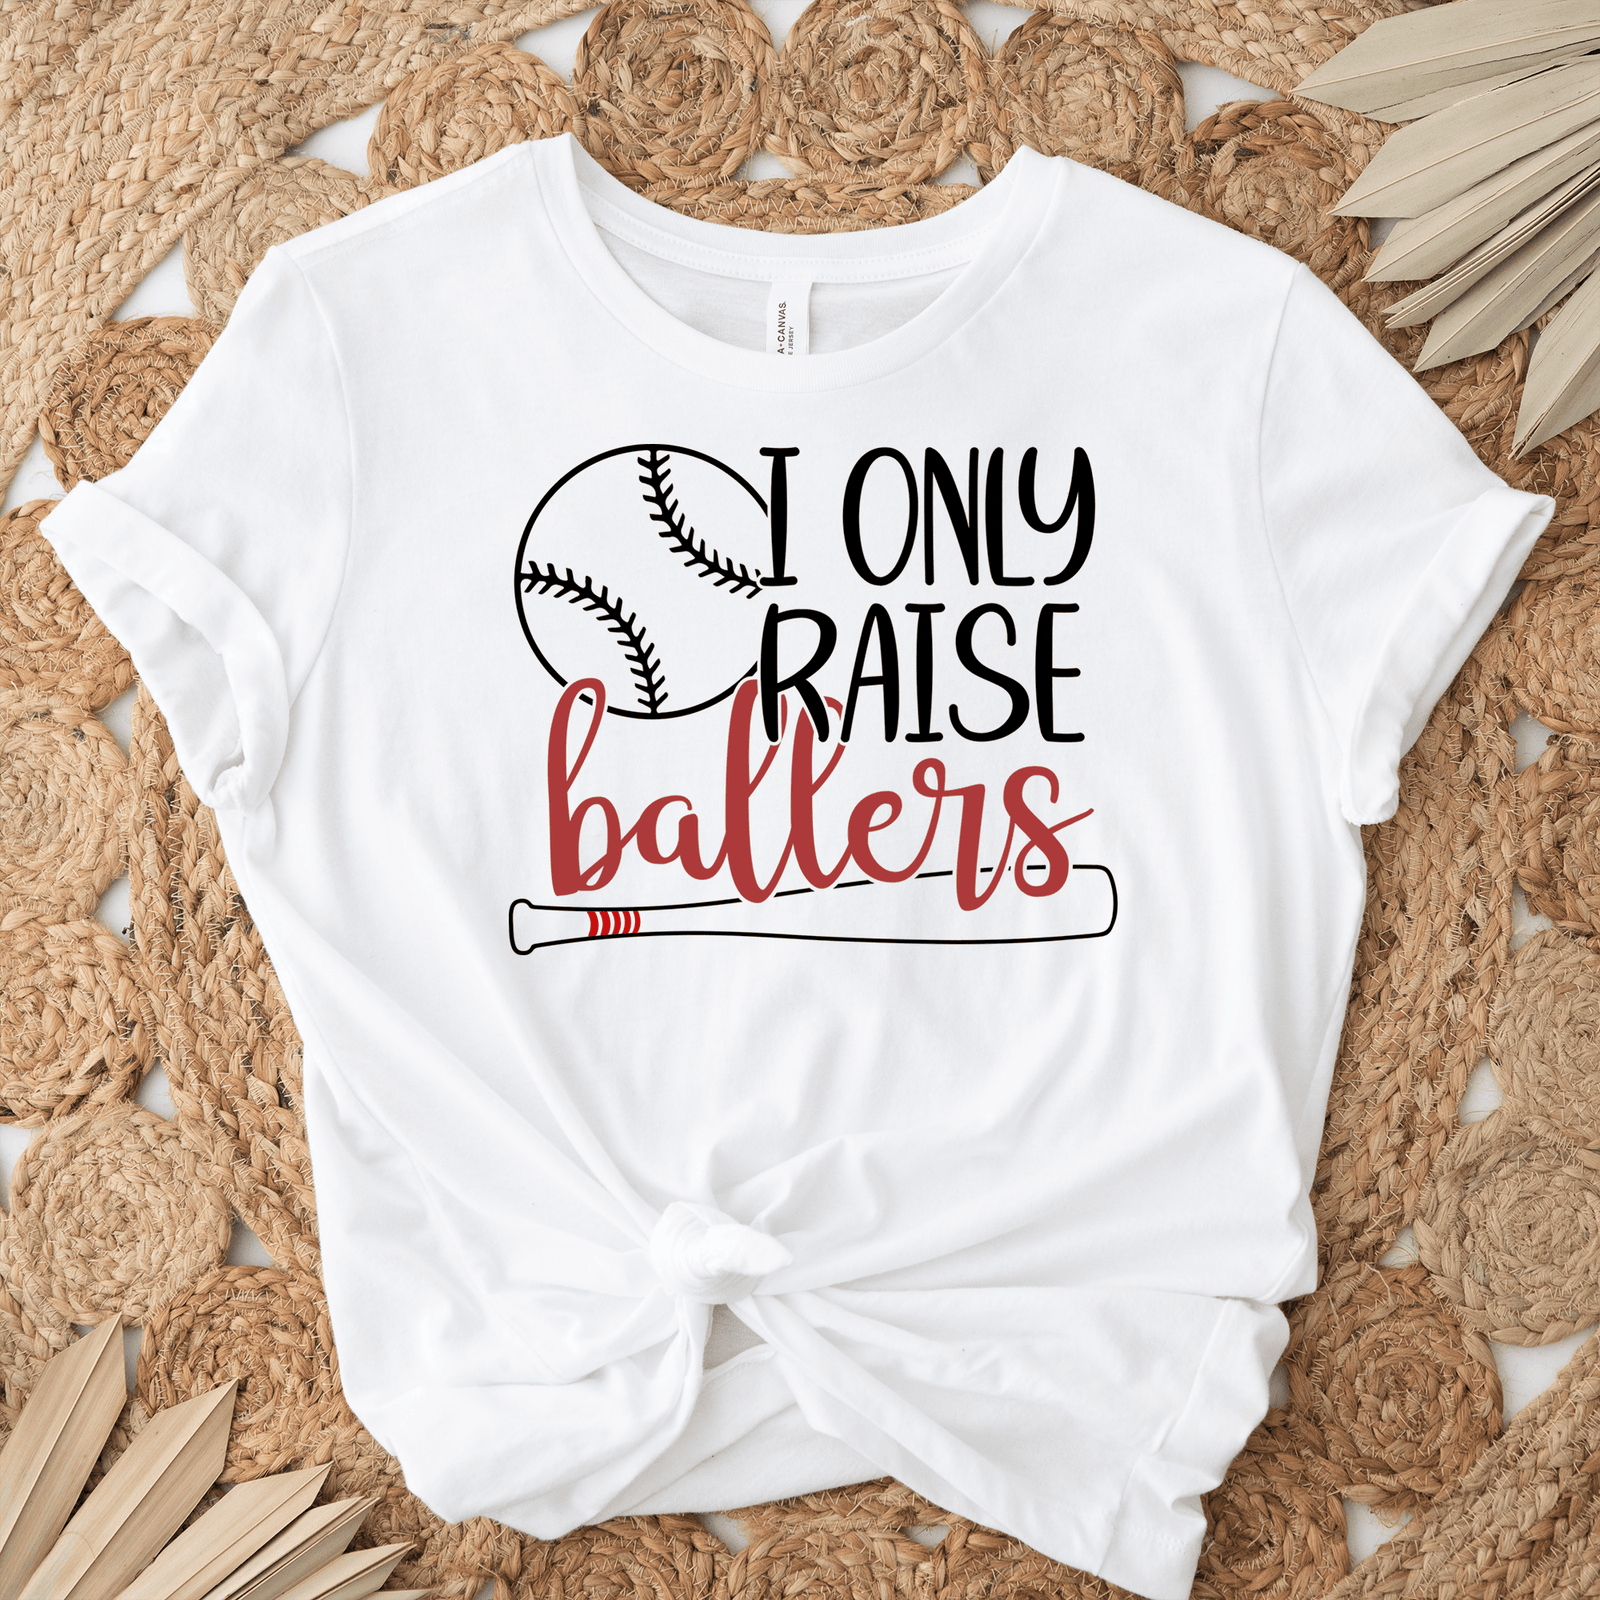 Womens White T Shirt with I-Only-Raise-Ballers design